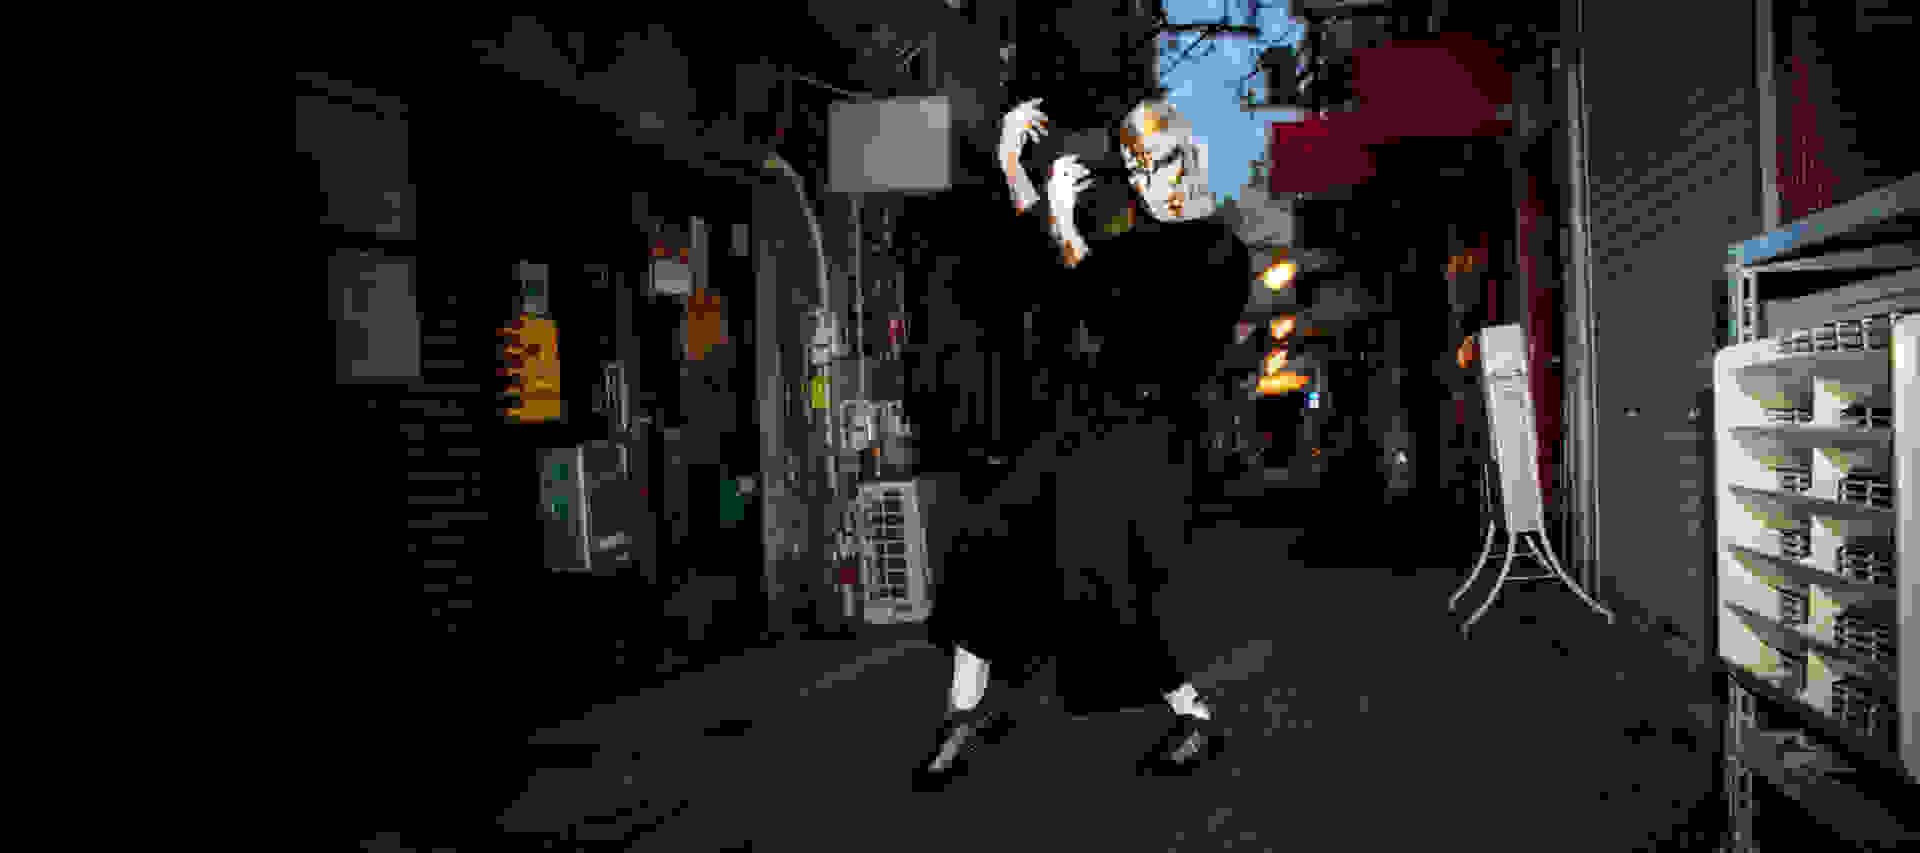 A person dances on a dark street while wearing black Y-3 apparel and a white and gold mask.